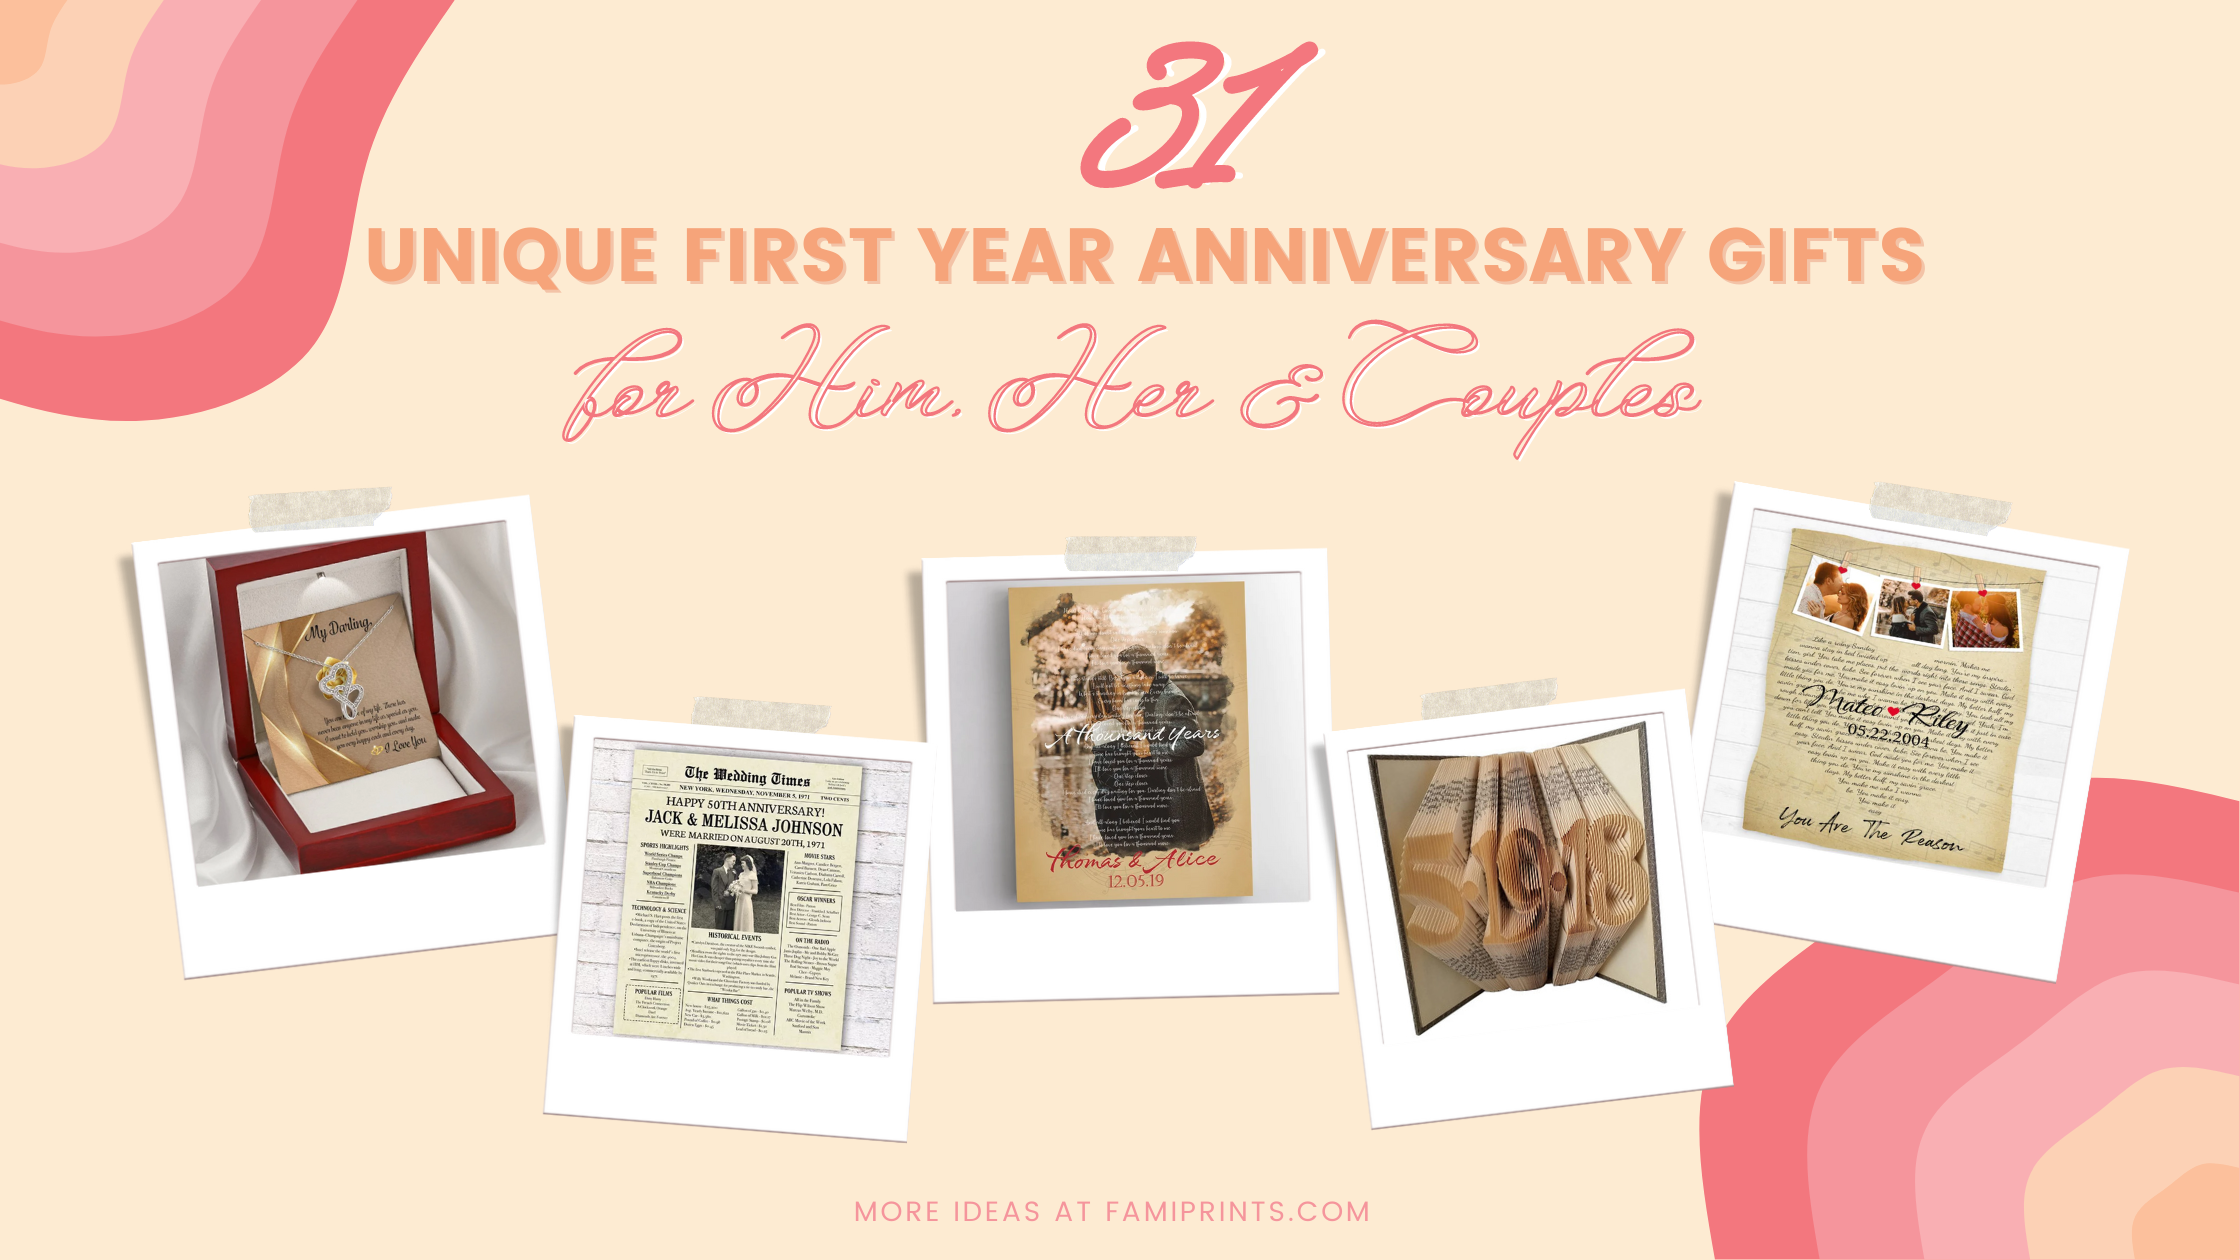 35+ Meaningful 1 Year Anniversary Gift Ideas For Girlfriend